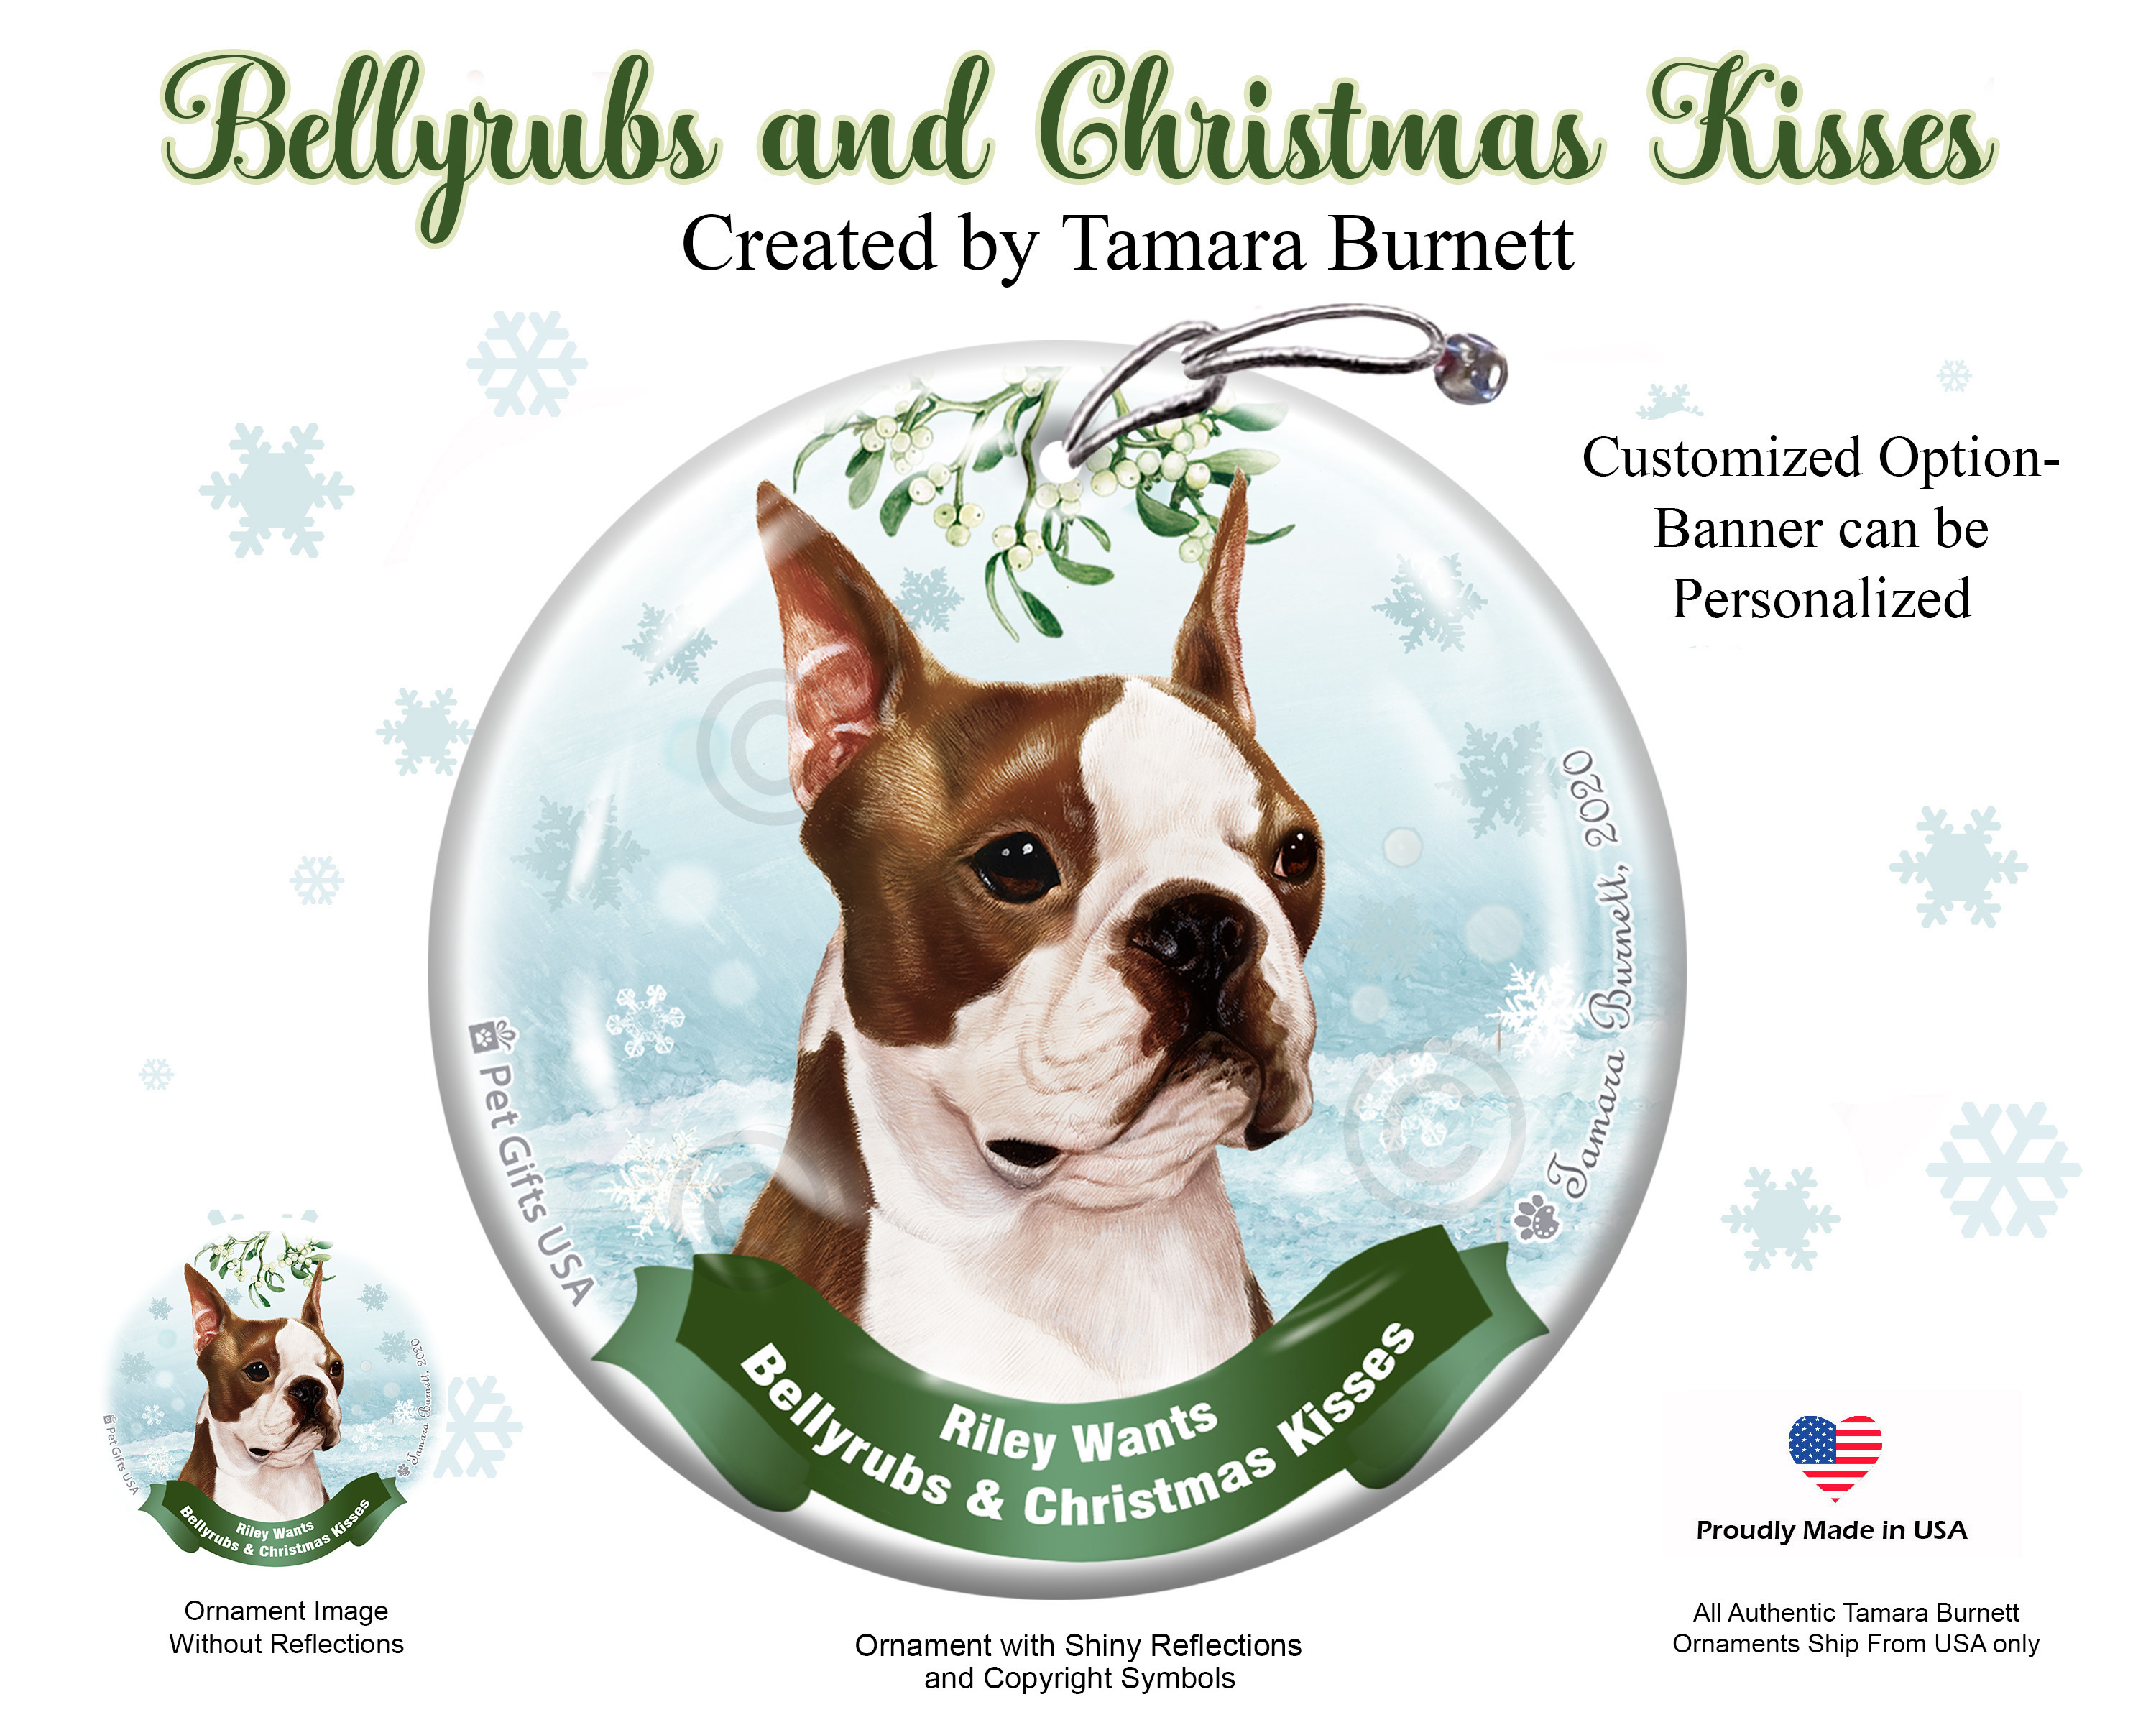 Boston Terrier Brown and White Belly Rubs and Christmas Kisses Ornament Image